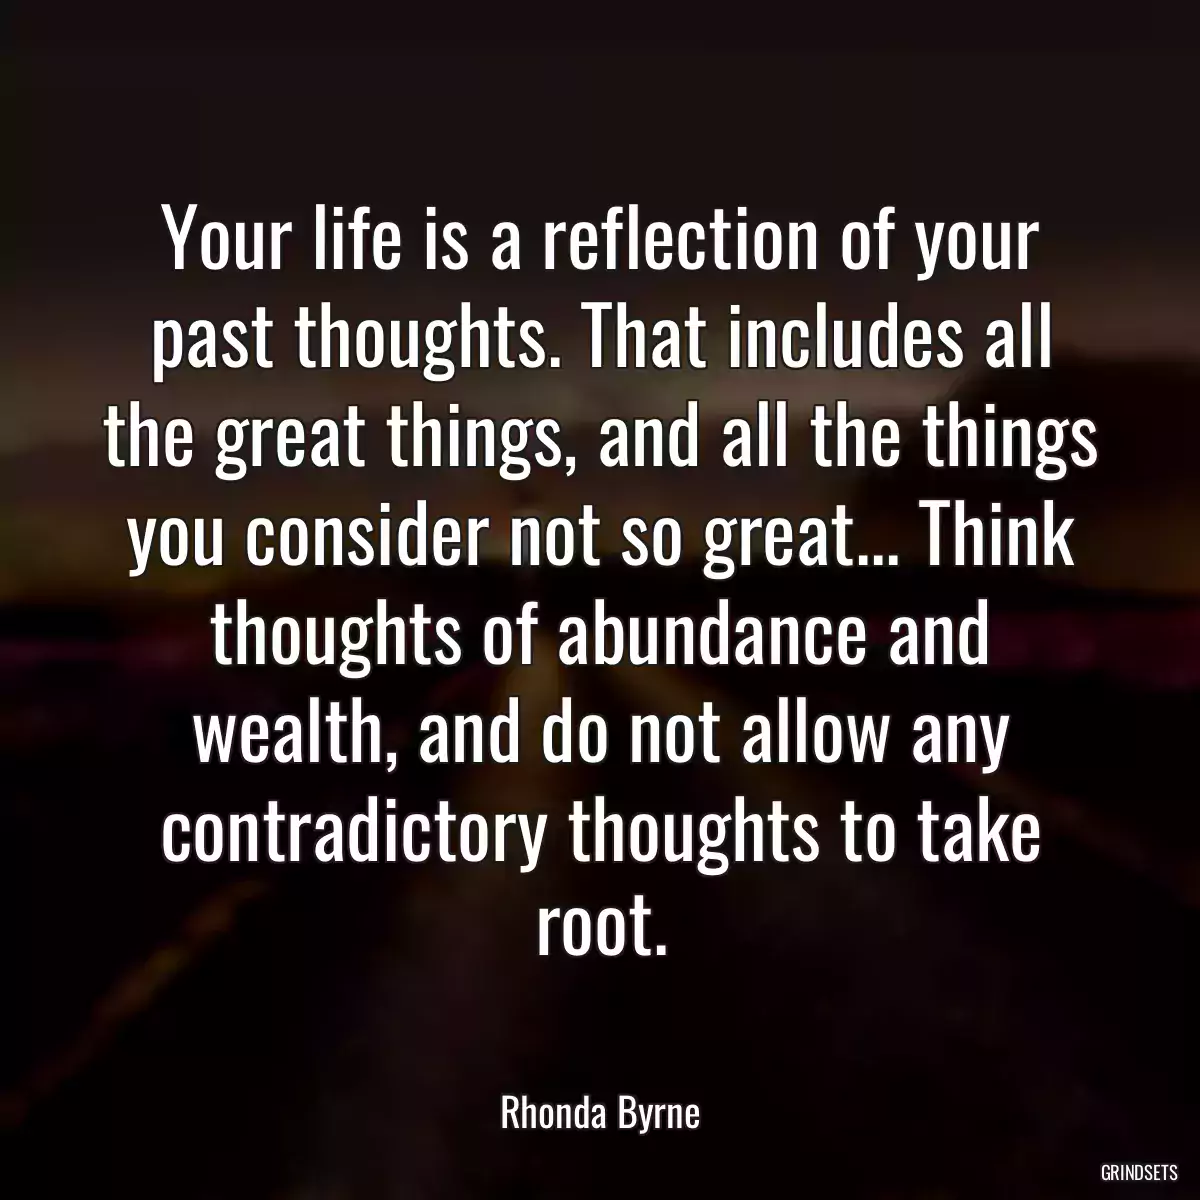 Your life is a reflection of your past thoughts. That includes all the great things, and all the things you consider not so great... Think thoughts of abundance and wealth, and do not allow any contradictory thoughts to take root.